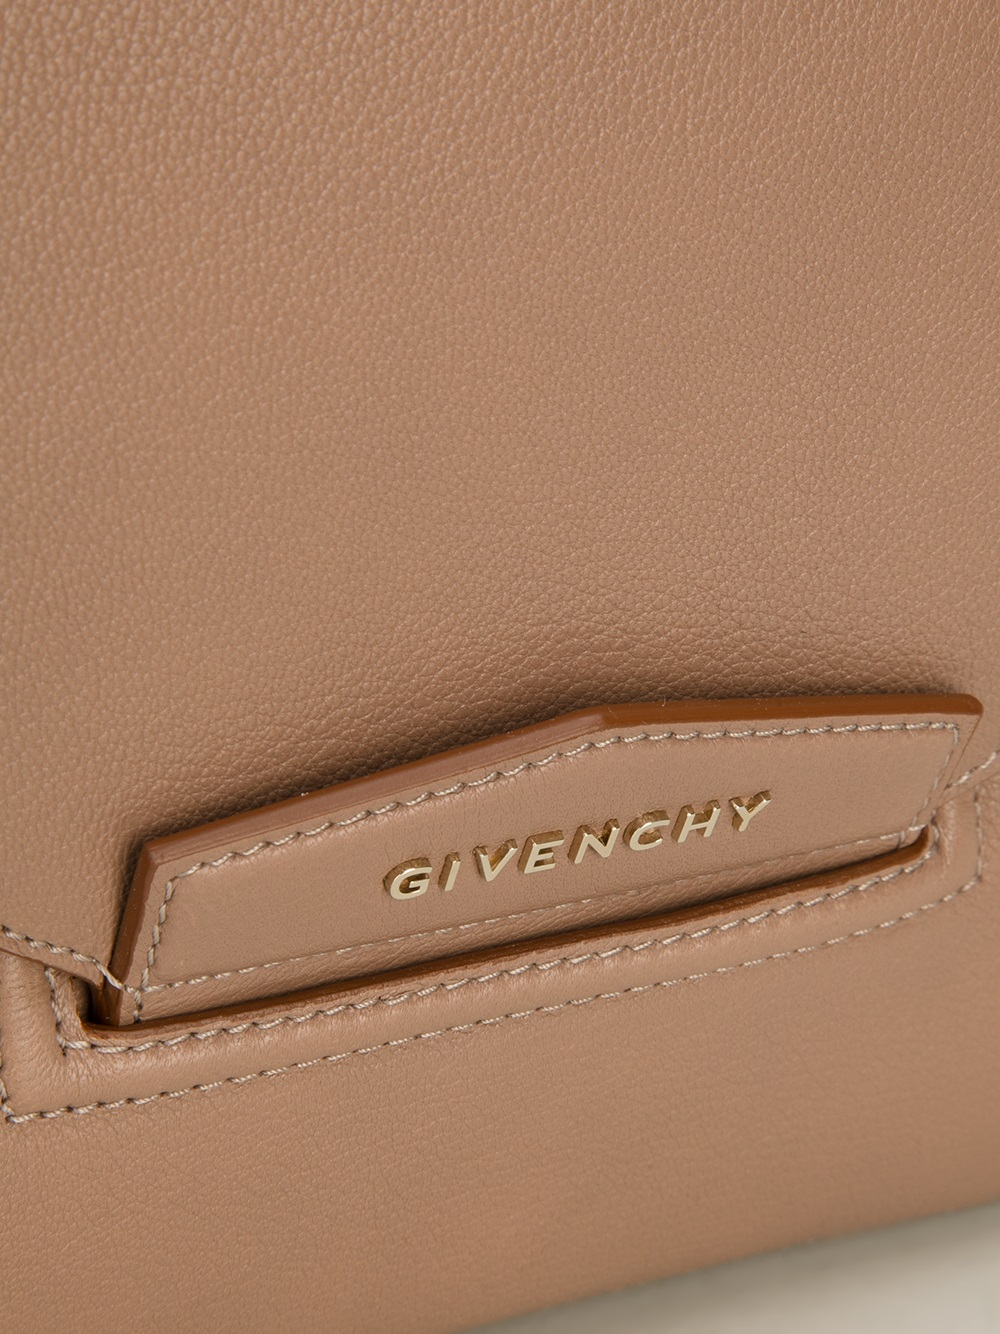 Givenchy Antigona Envelope Clutch Grained Leather (Varied Colors